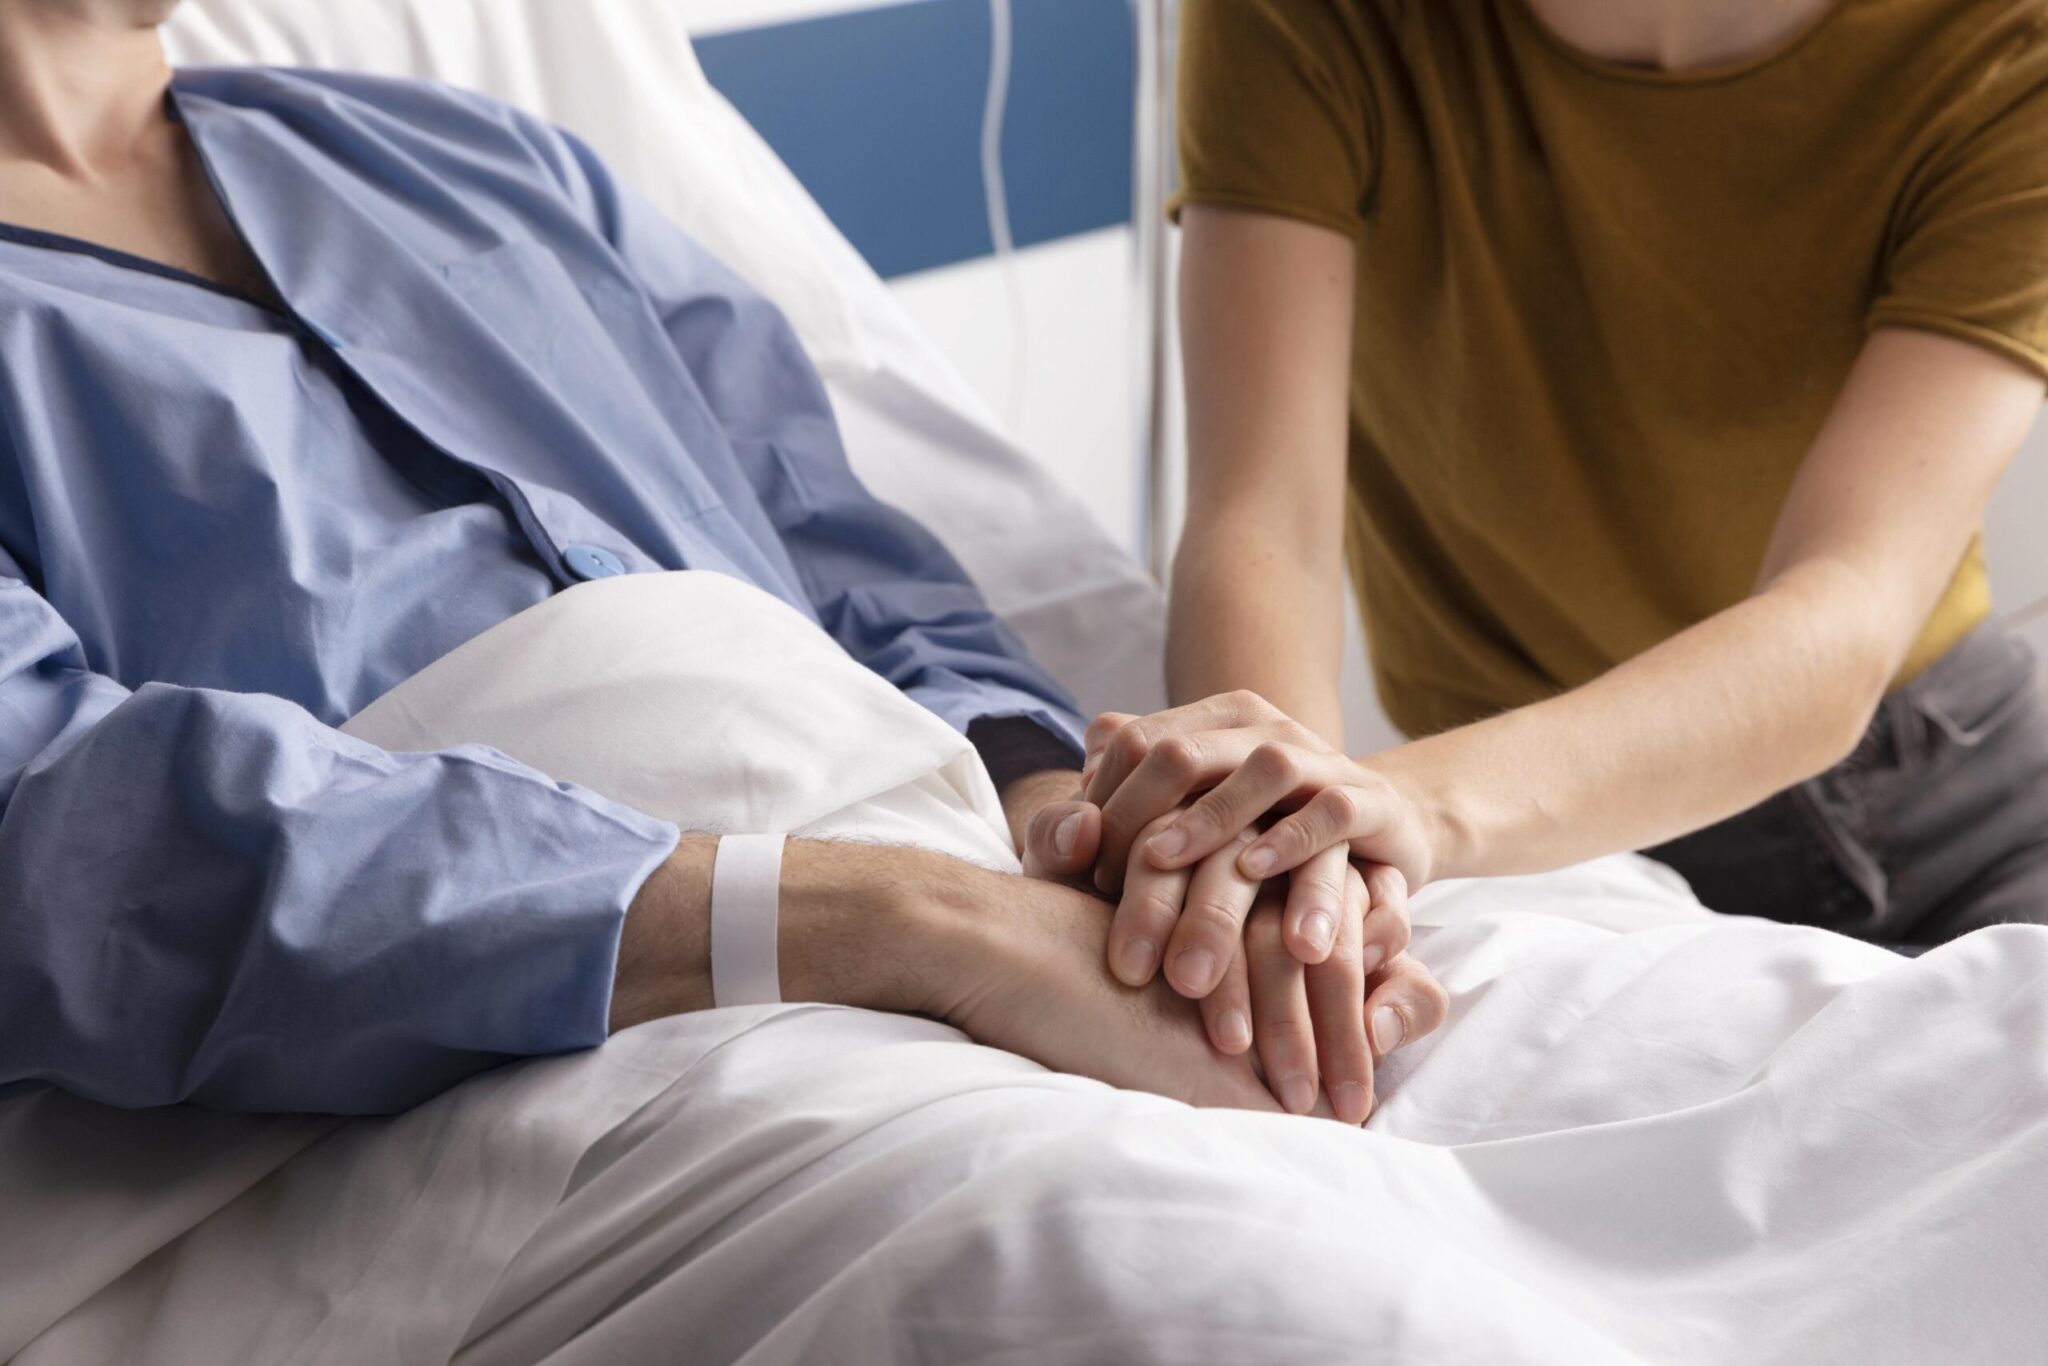 Understanding End-of-Life Signs: Recognizing Symptoms 6 Months Before Death